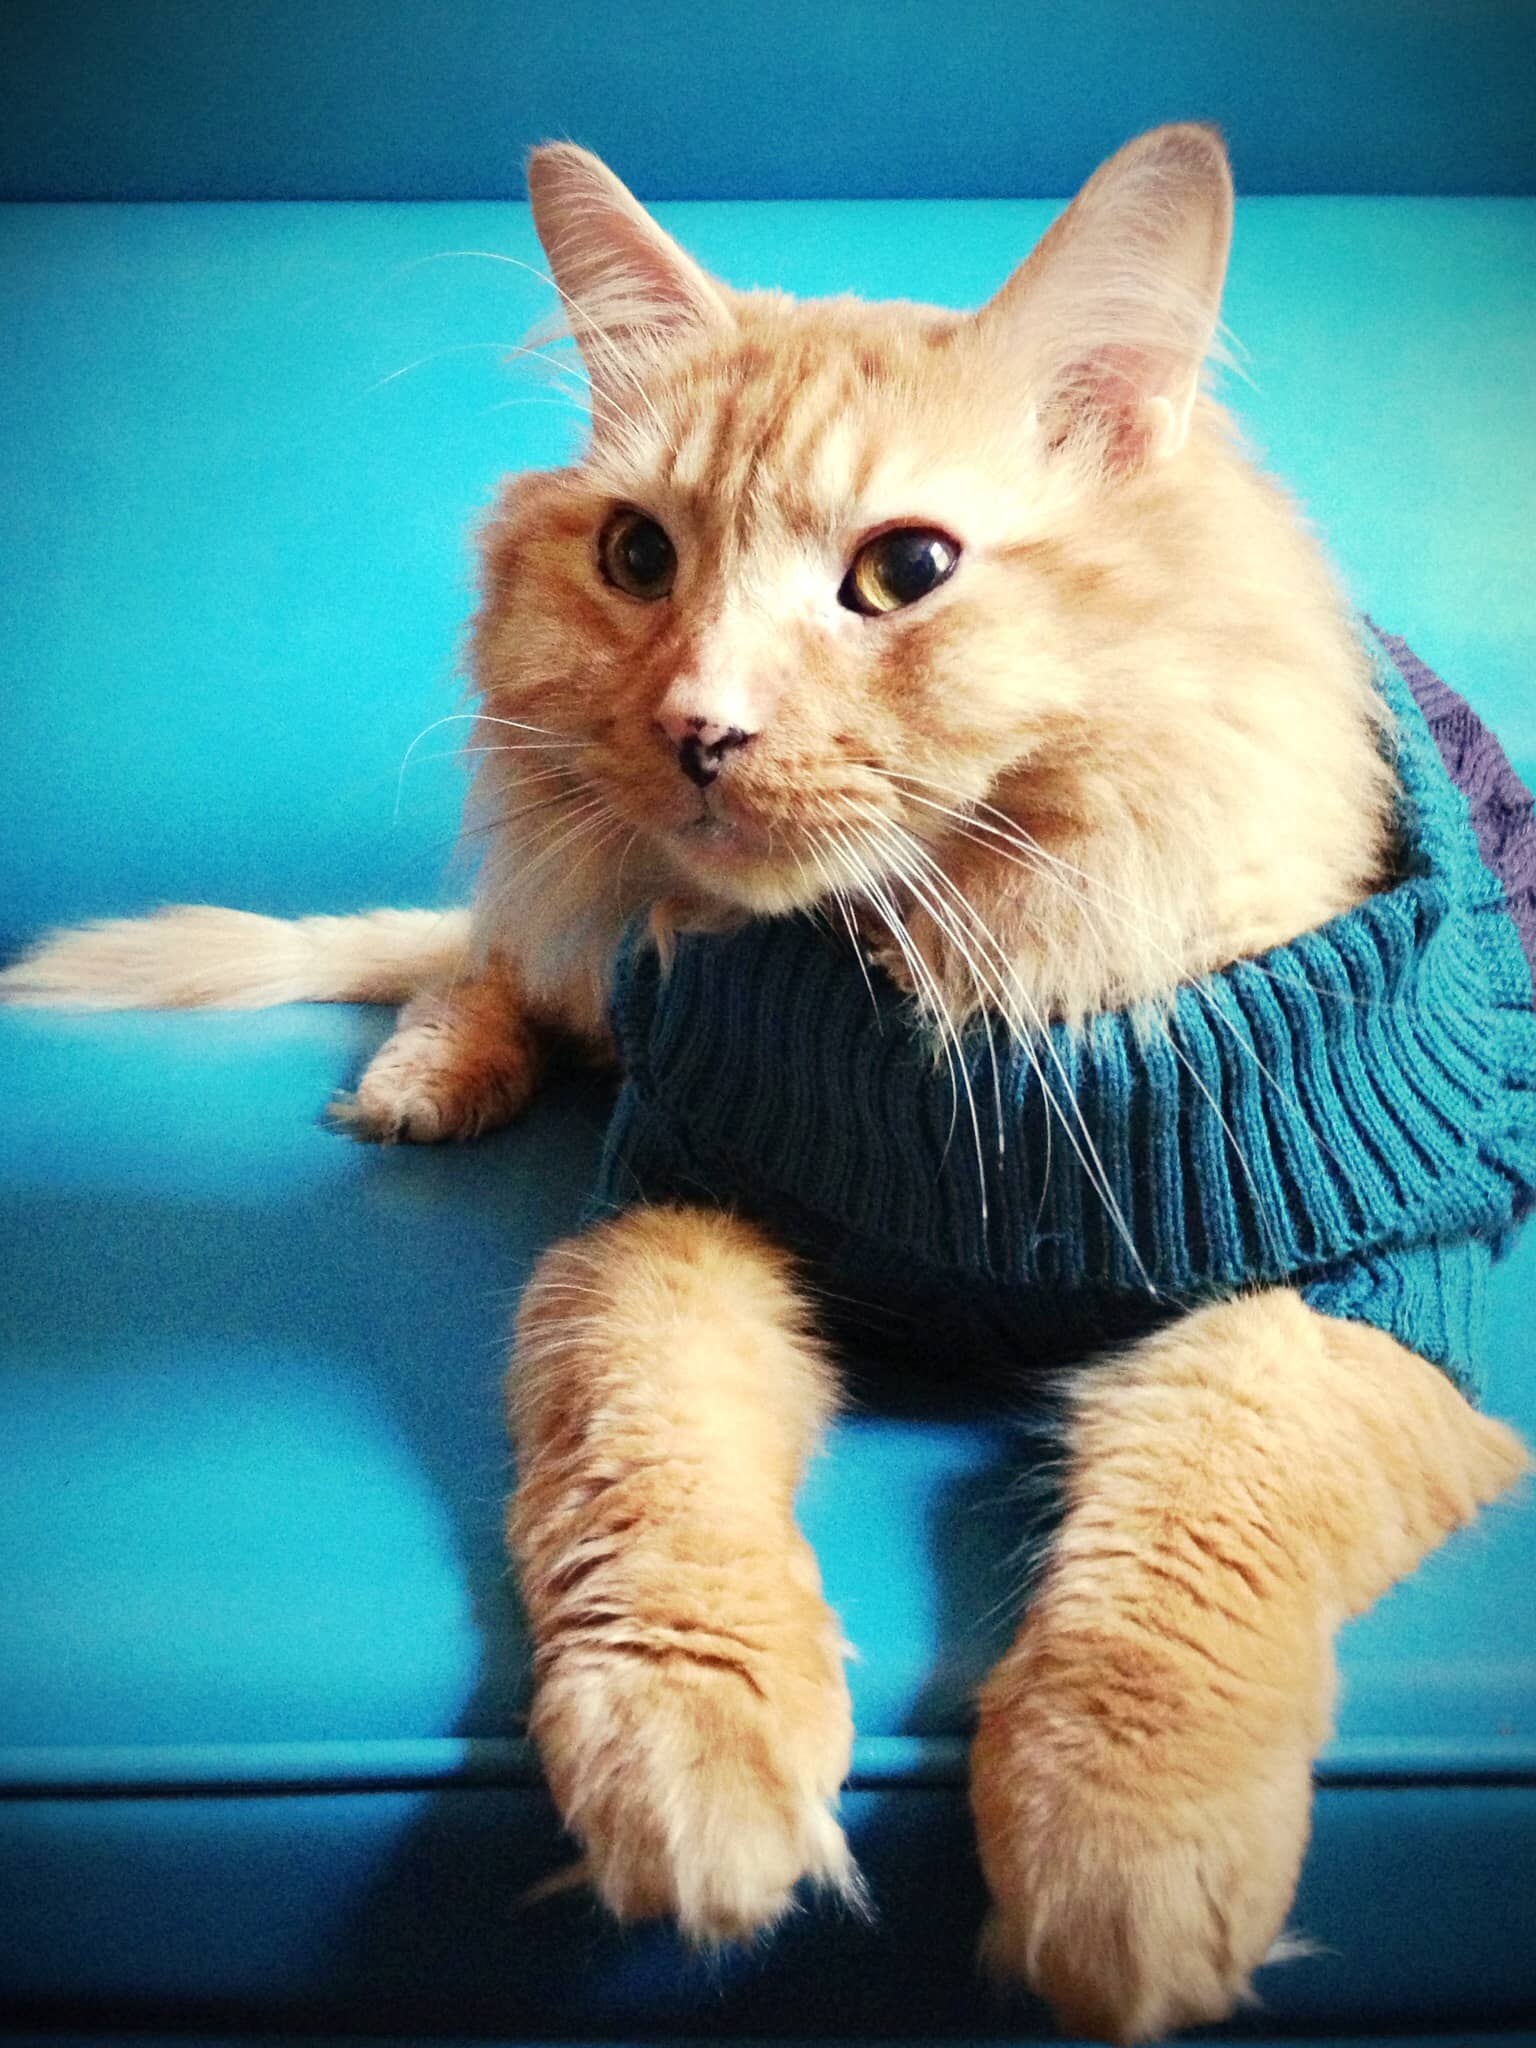 Haskell the kitty in a sweater